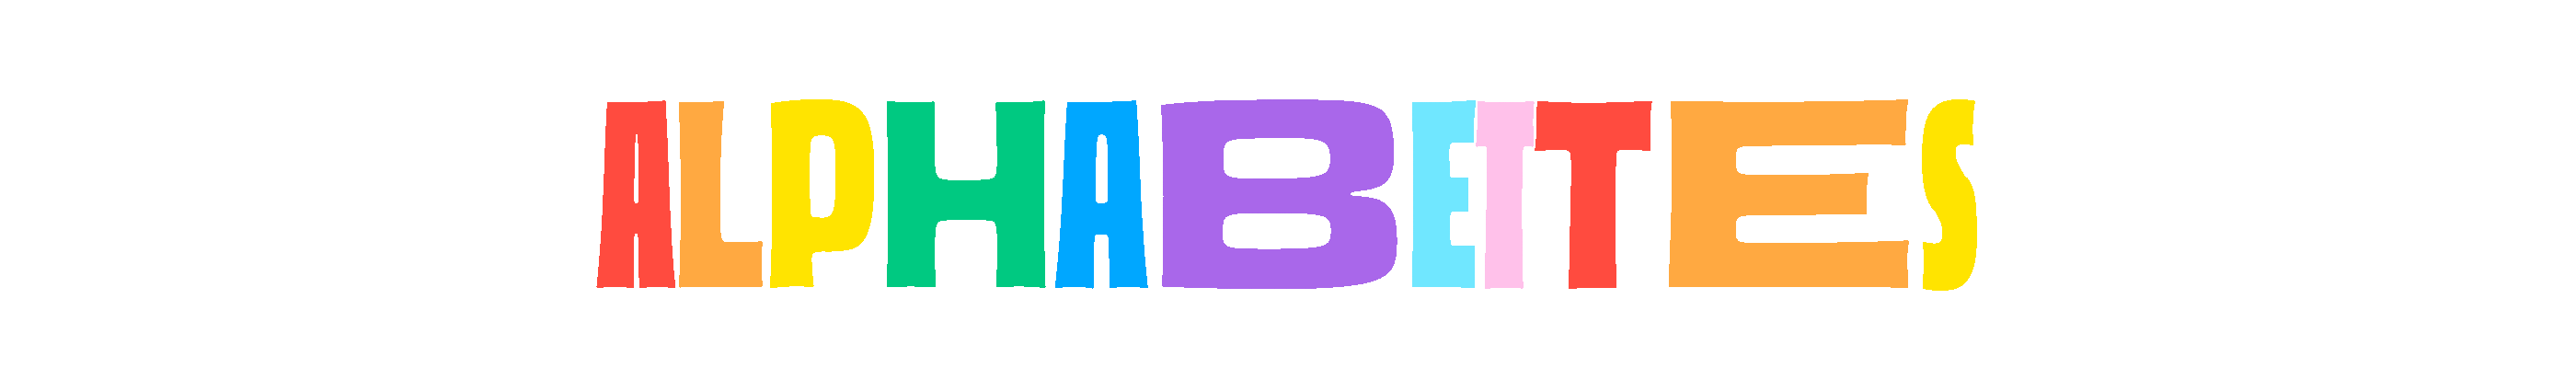 Alphabettes header in raingow colors animated as a waving flag in the typeface Puffling